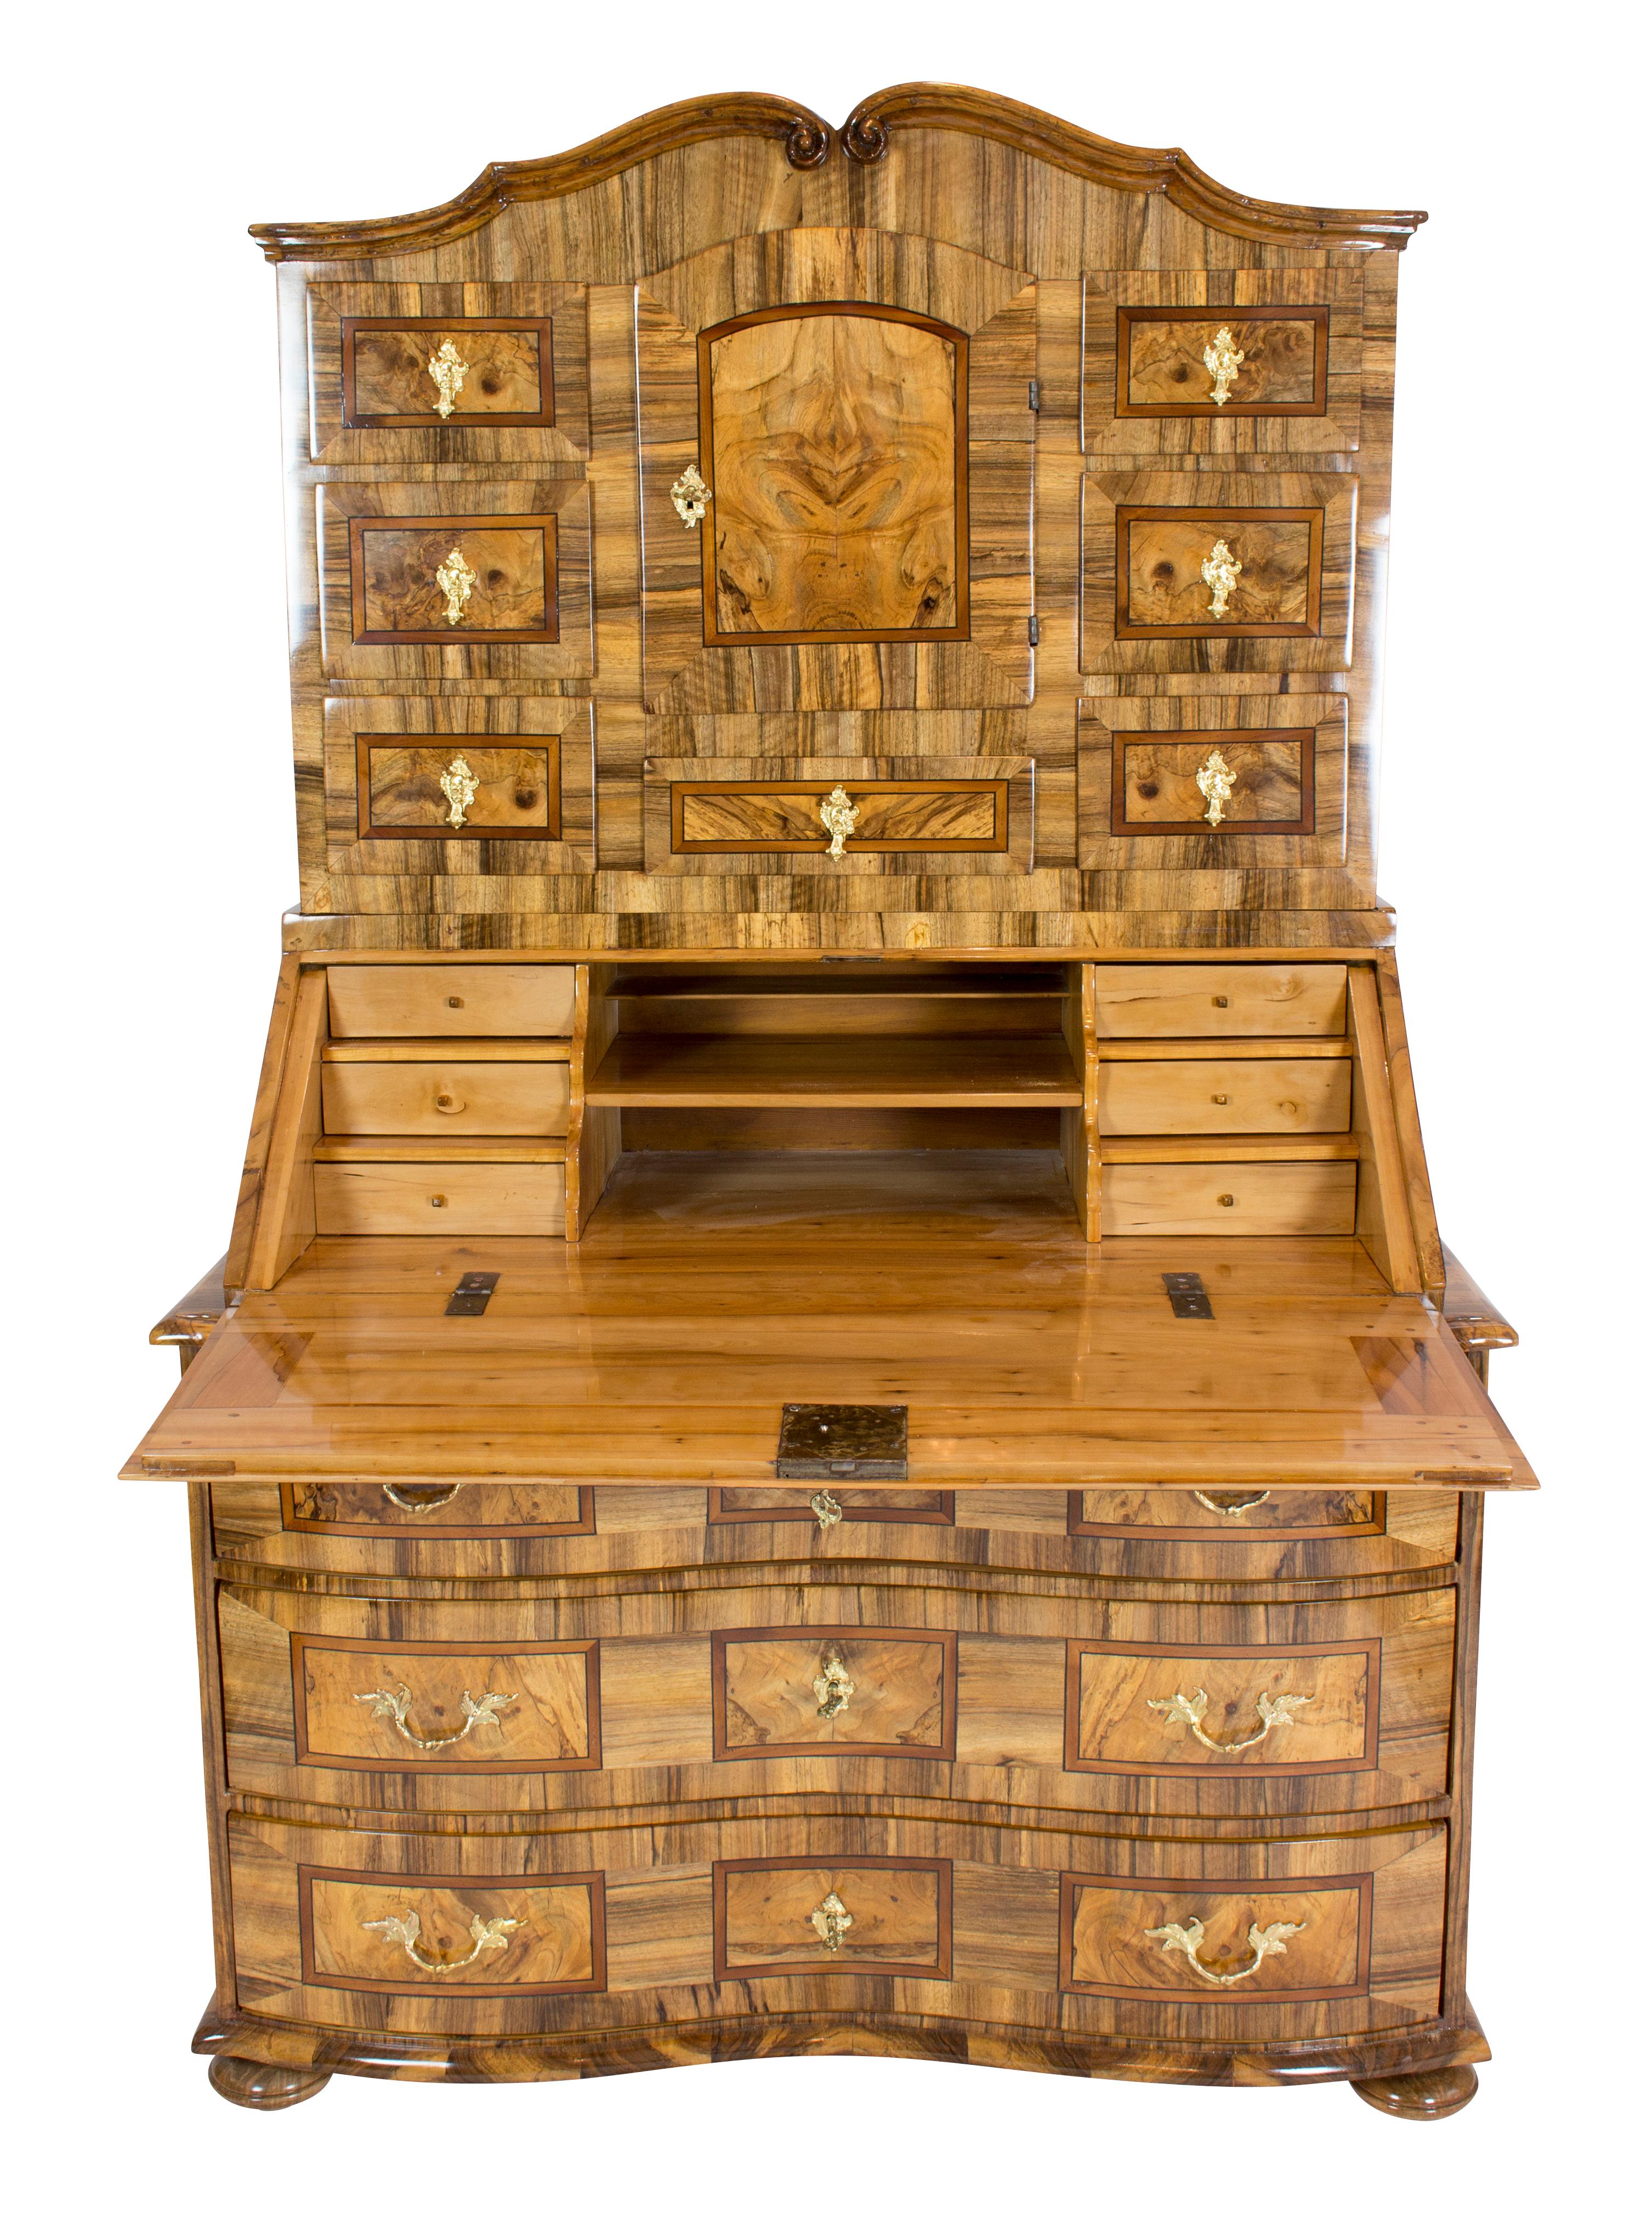 Polished 18th Centurey Baroque Walnut Tabernacle / Secretaire For Sale